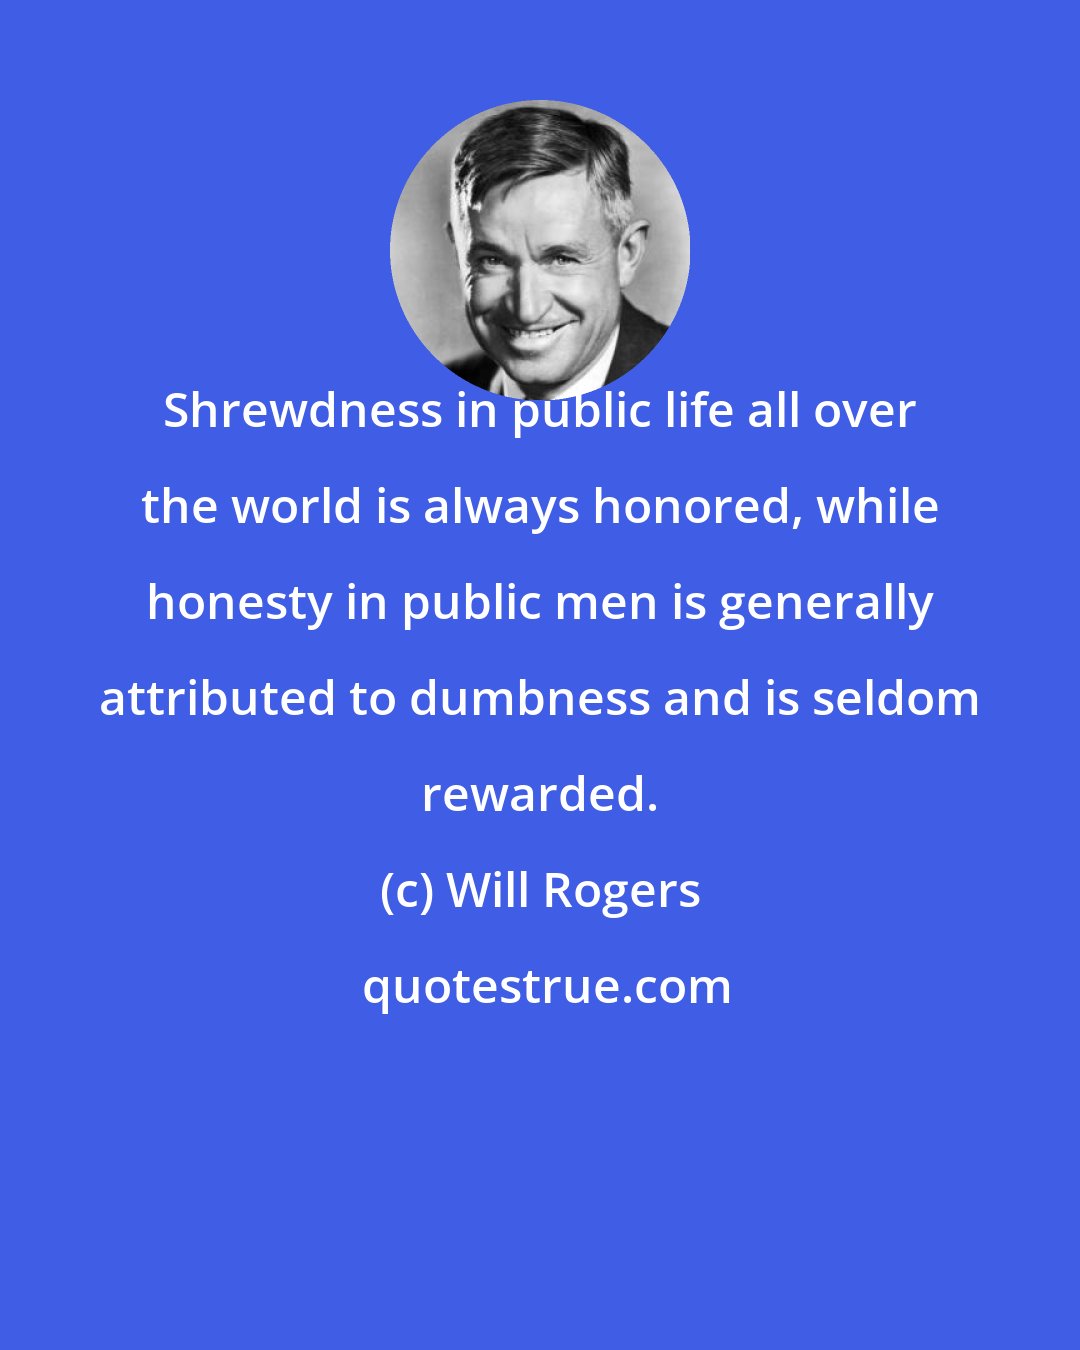 Will Rogers: Shrewdness in public life all over the world is always honored, while honesty in public men is generally attributed to dumbness and is seldom rewarded.